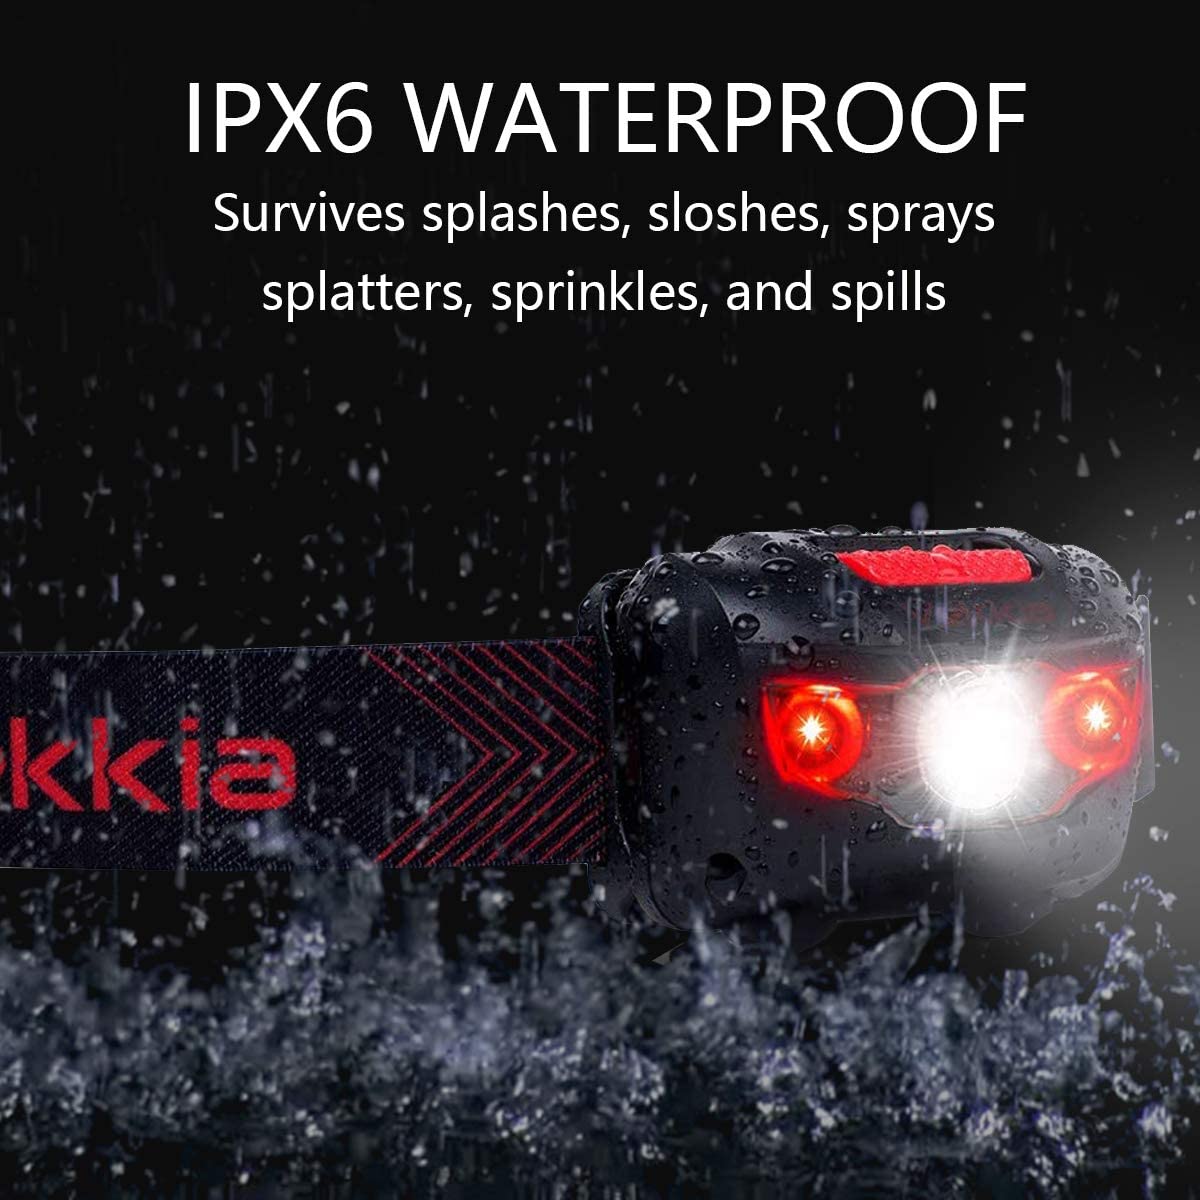 VEKKIA Ultra Bright LED Headlamp – Lighting Modes, White  Red LEDs,  Adjustable Strap, IPX6 Water Resistant. Great for Running, Camping, Hiking   More. Batteries Included Red Rock Flight School